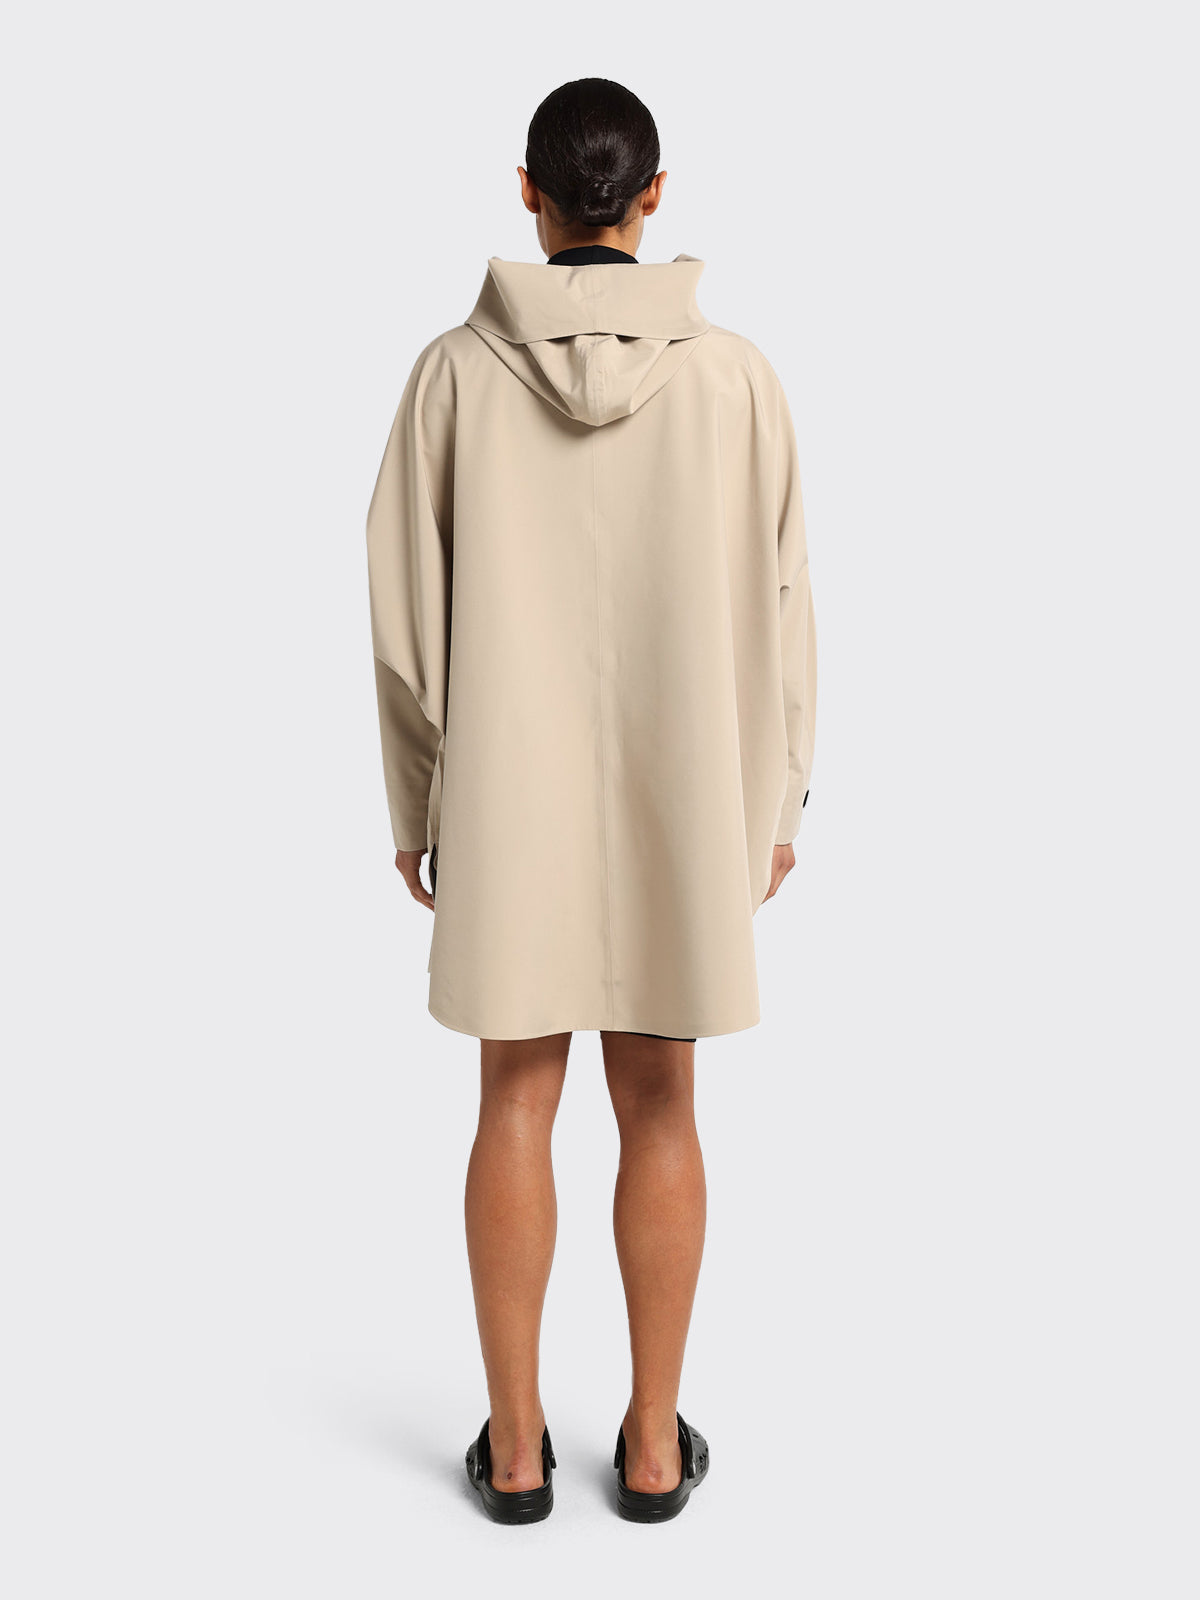 Woman dressed in Begren poncho in Beige from Blæst